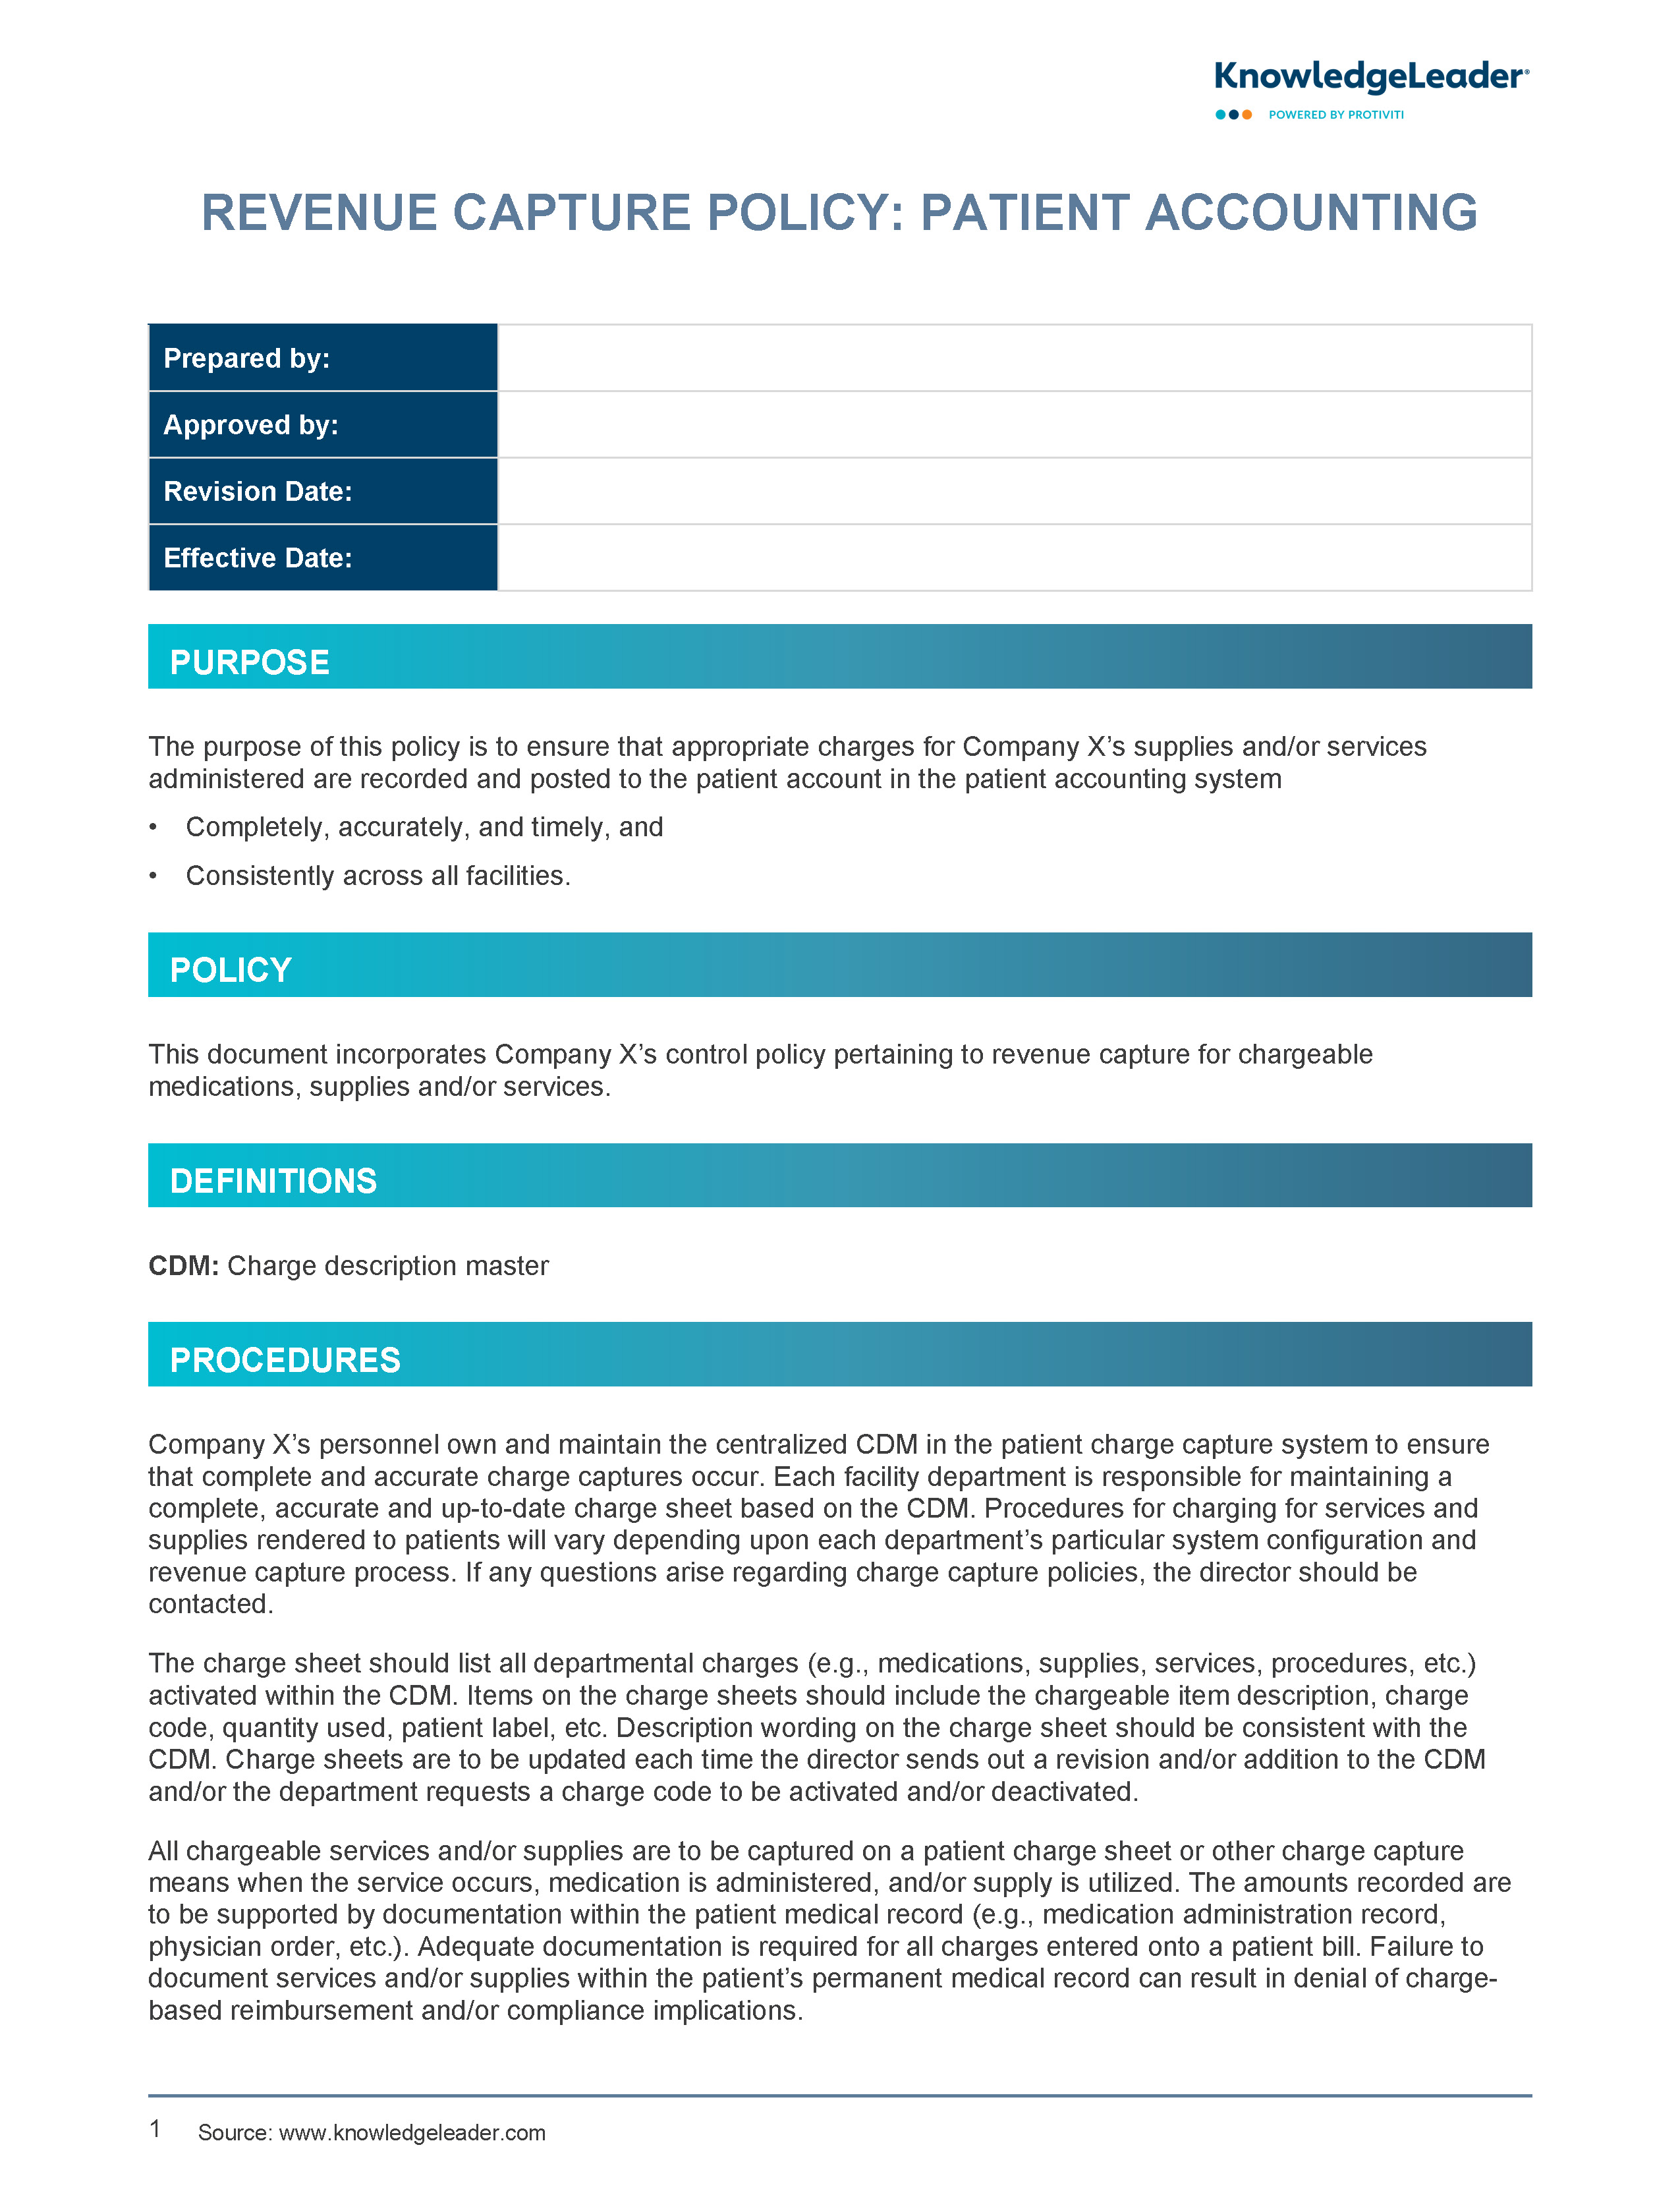 Screenshot of the first page of Revenue Capture Policy: Patient Accounting